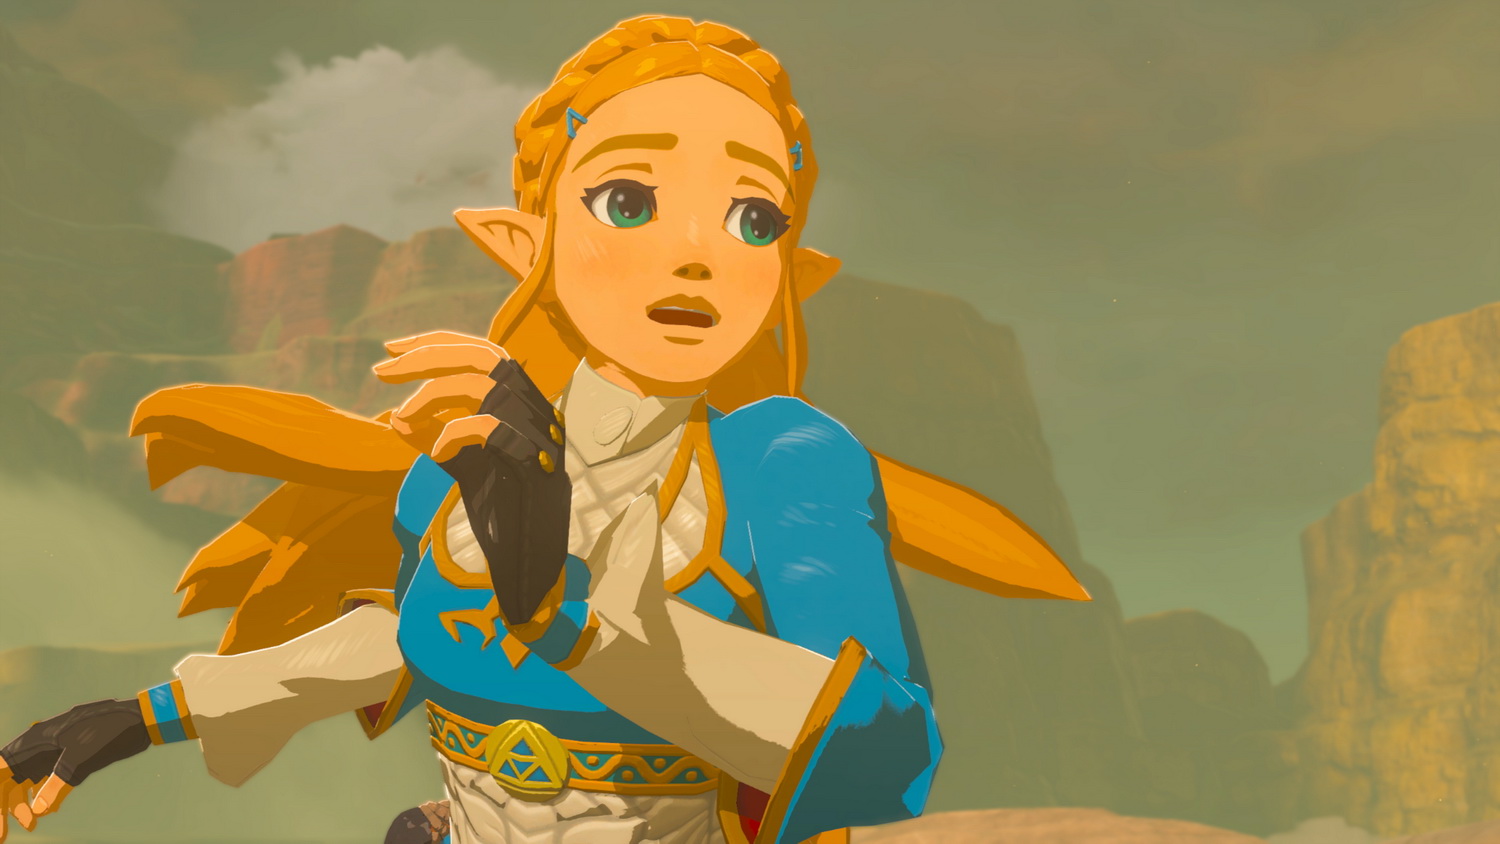 New patch significantly improves frame rates in Zelda: Breath of